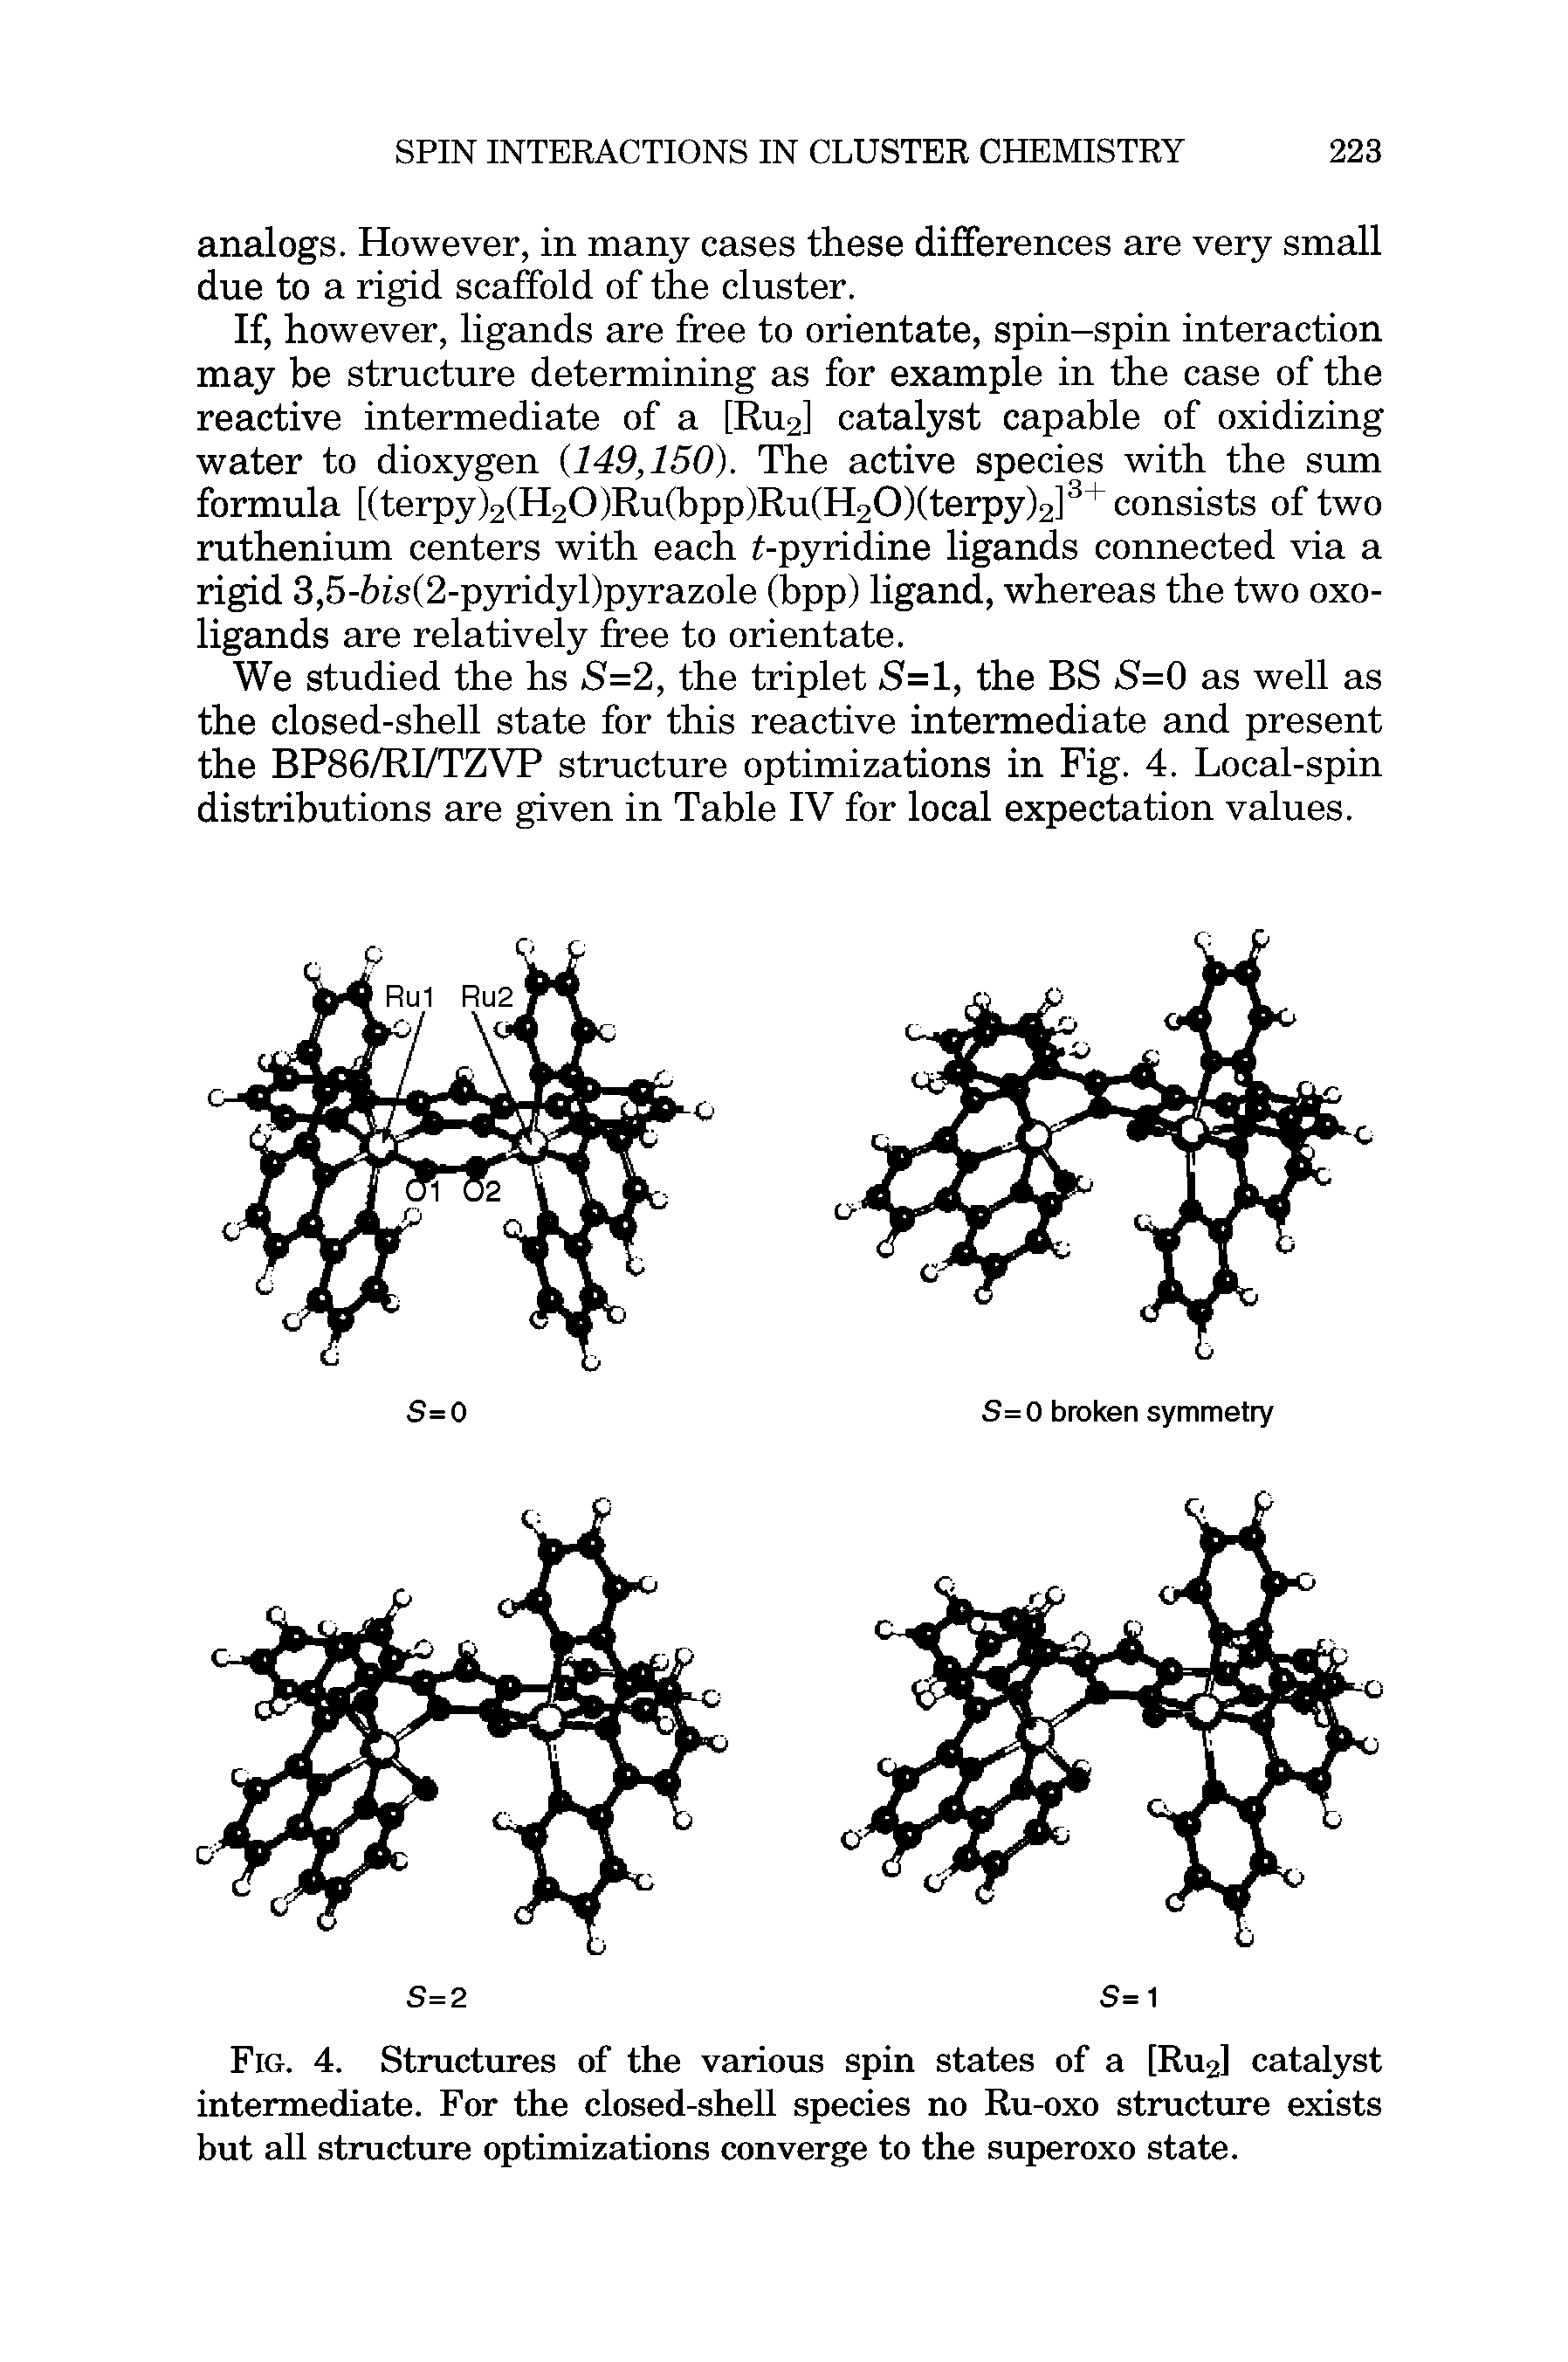 Fig. 4. Structures of the various spin states of a [Ru2] catalyst intermediate. For the closed-shell species no Ru-oxo structure exists but all structure optimizations converge to the superoxo state.